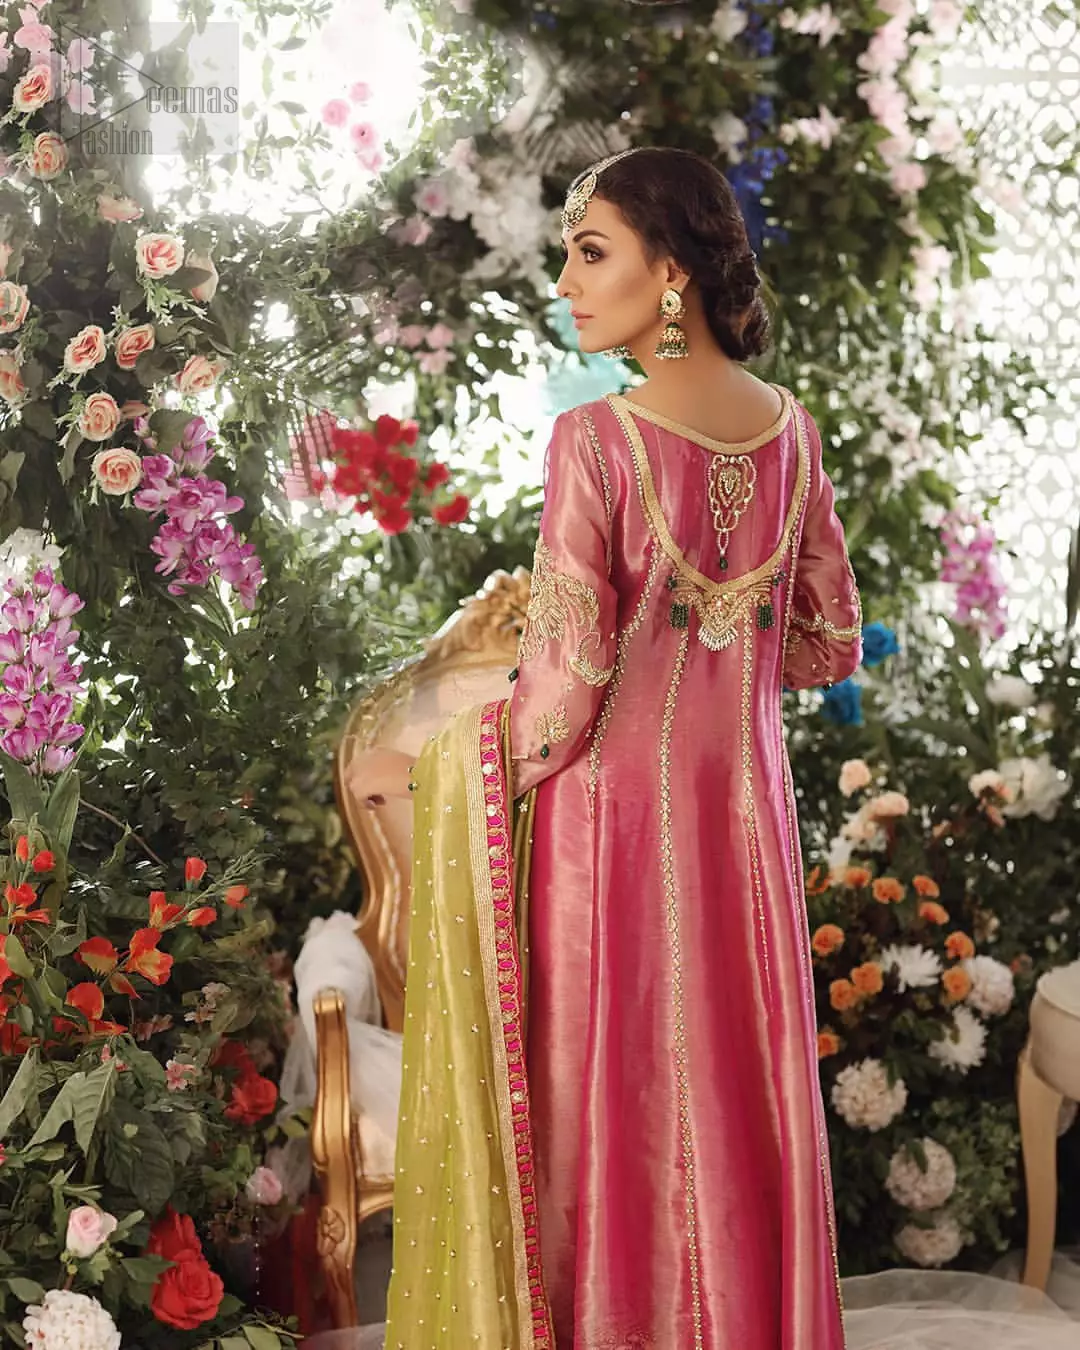 Nothing speaks of femininity and class louder than this mehndi outfits for bridesmaids. This beautiful mehndi dress comes with anarkali frock with beautiful embellished motifs around the scalloped hemline and vertically worked gold lines and heavily embellished neckline with light golden, champagne and antique shaded zardozi work. It comes with sharara adorned with colored floral embroidery with champagne embellishment. Complete the look with parrot green dupatta having four sided applique borders and sequins spray on the ground.